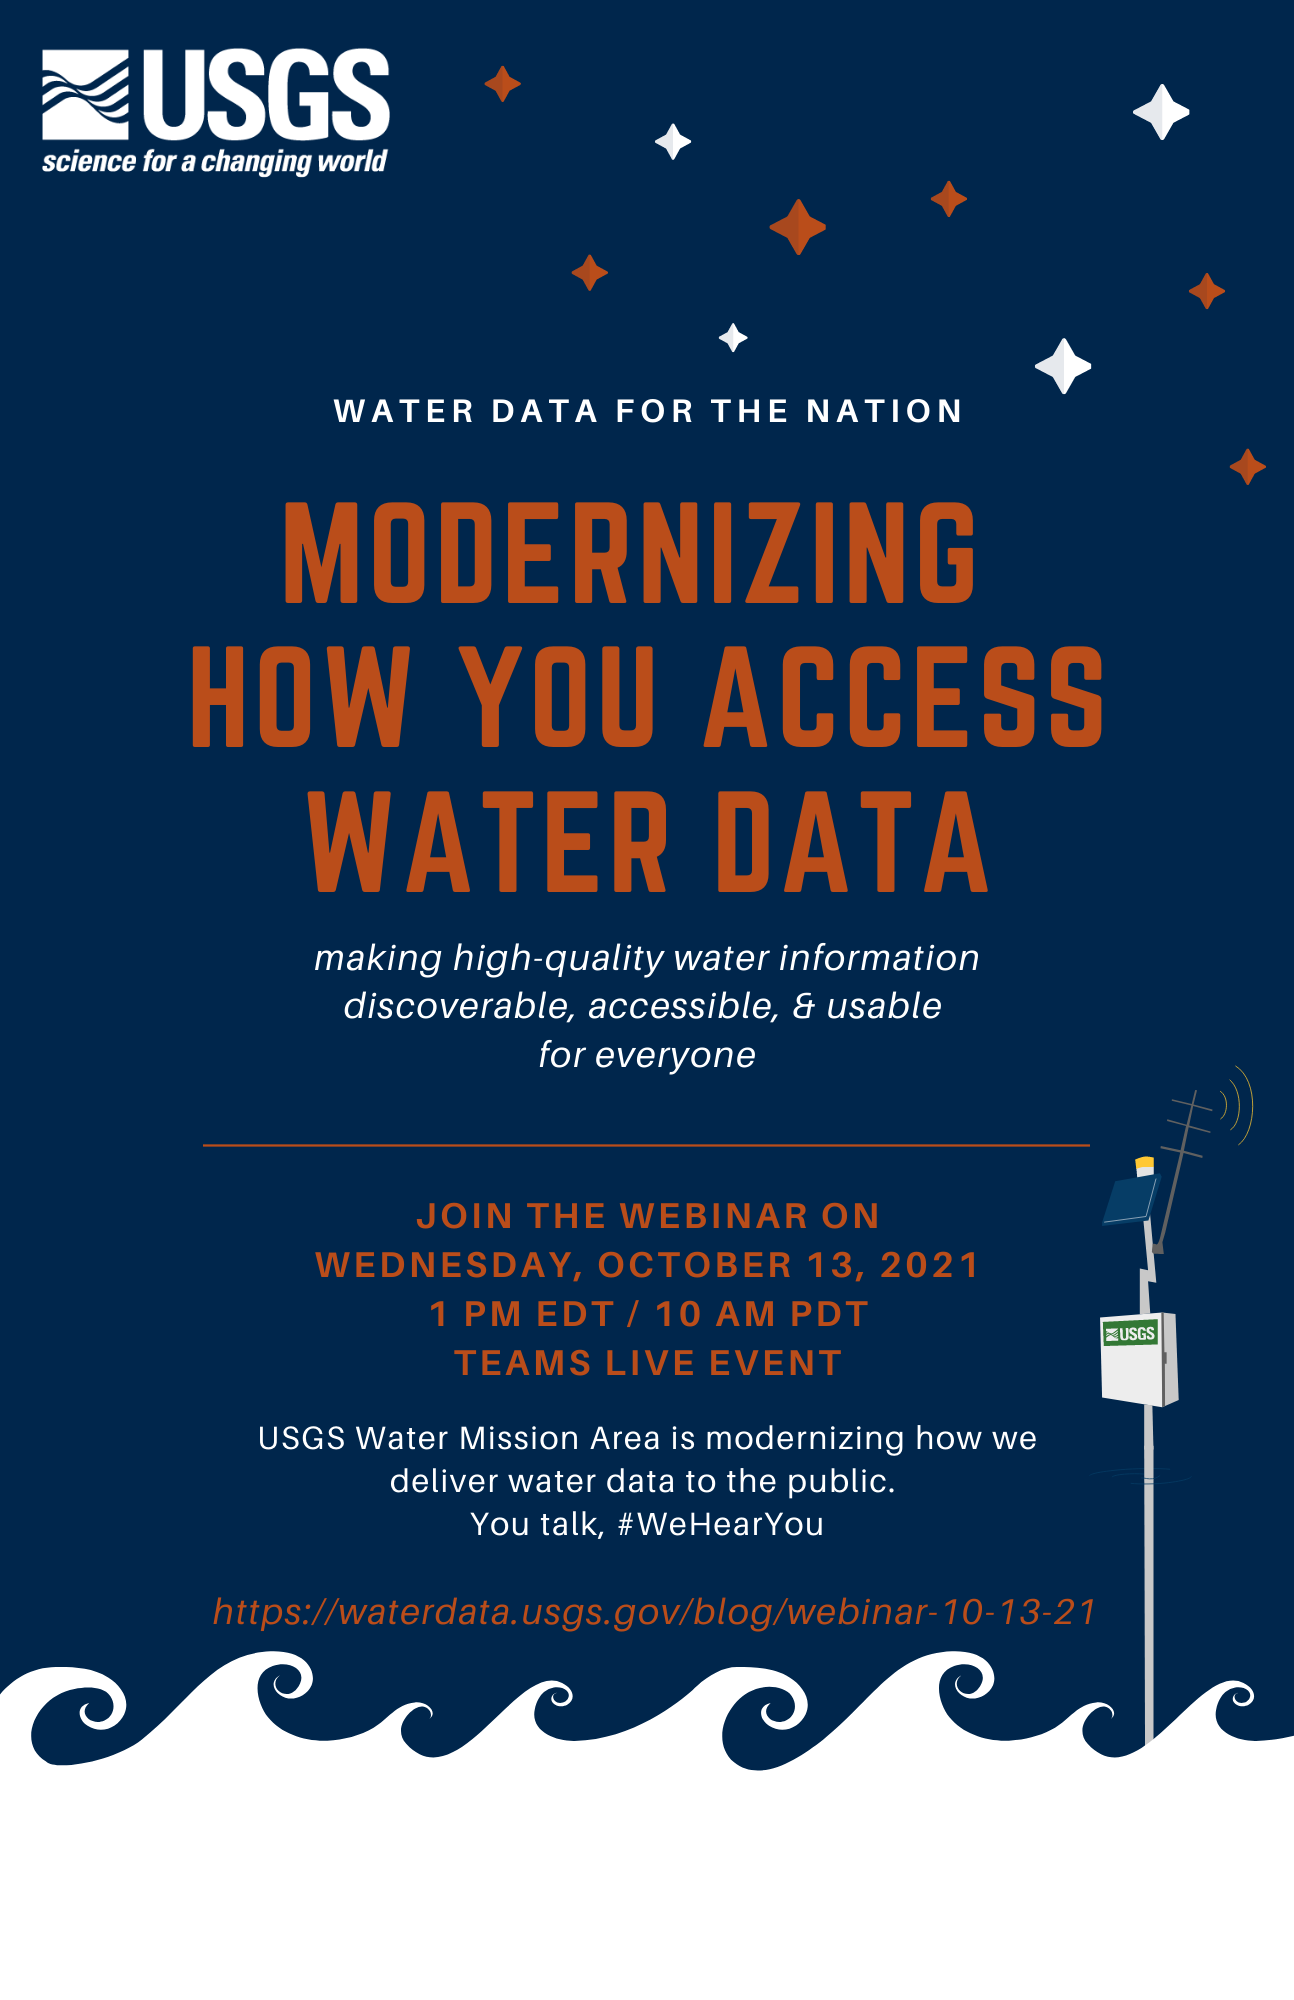 Dark blue flyer with white USGS logo in top left, white and orange graphic stars in top right, and white waves on bottom with streamgage graphic. White and orange text reads: Water Data for the Nation. Modernizing How You Access Water Data. Making high-quality water information discoverable, accessible, and usable for everyone. Join the webinar on Wednesday, October 13th, 2021 from 1-2 pm EDT / 10-11 am PDT. Teams live event. USGS Water Mission Area is modernizing how we deliver water data to the public. You talk, #WeHearYou. https://waterdata.usgs.gov/blog/webinar-10-13-21